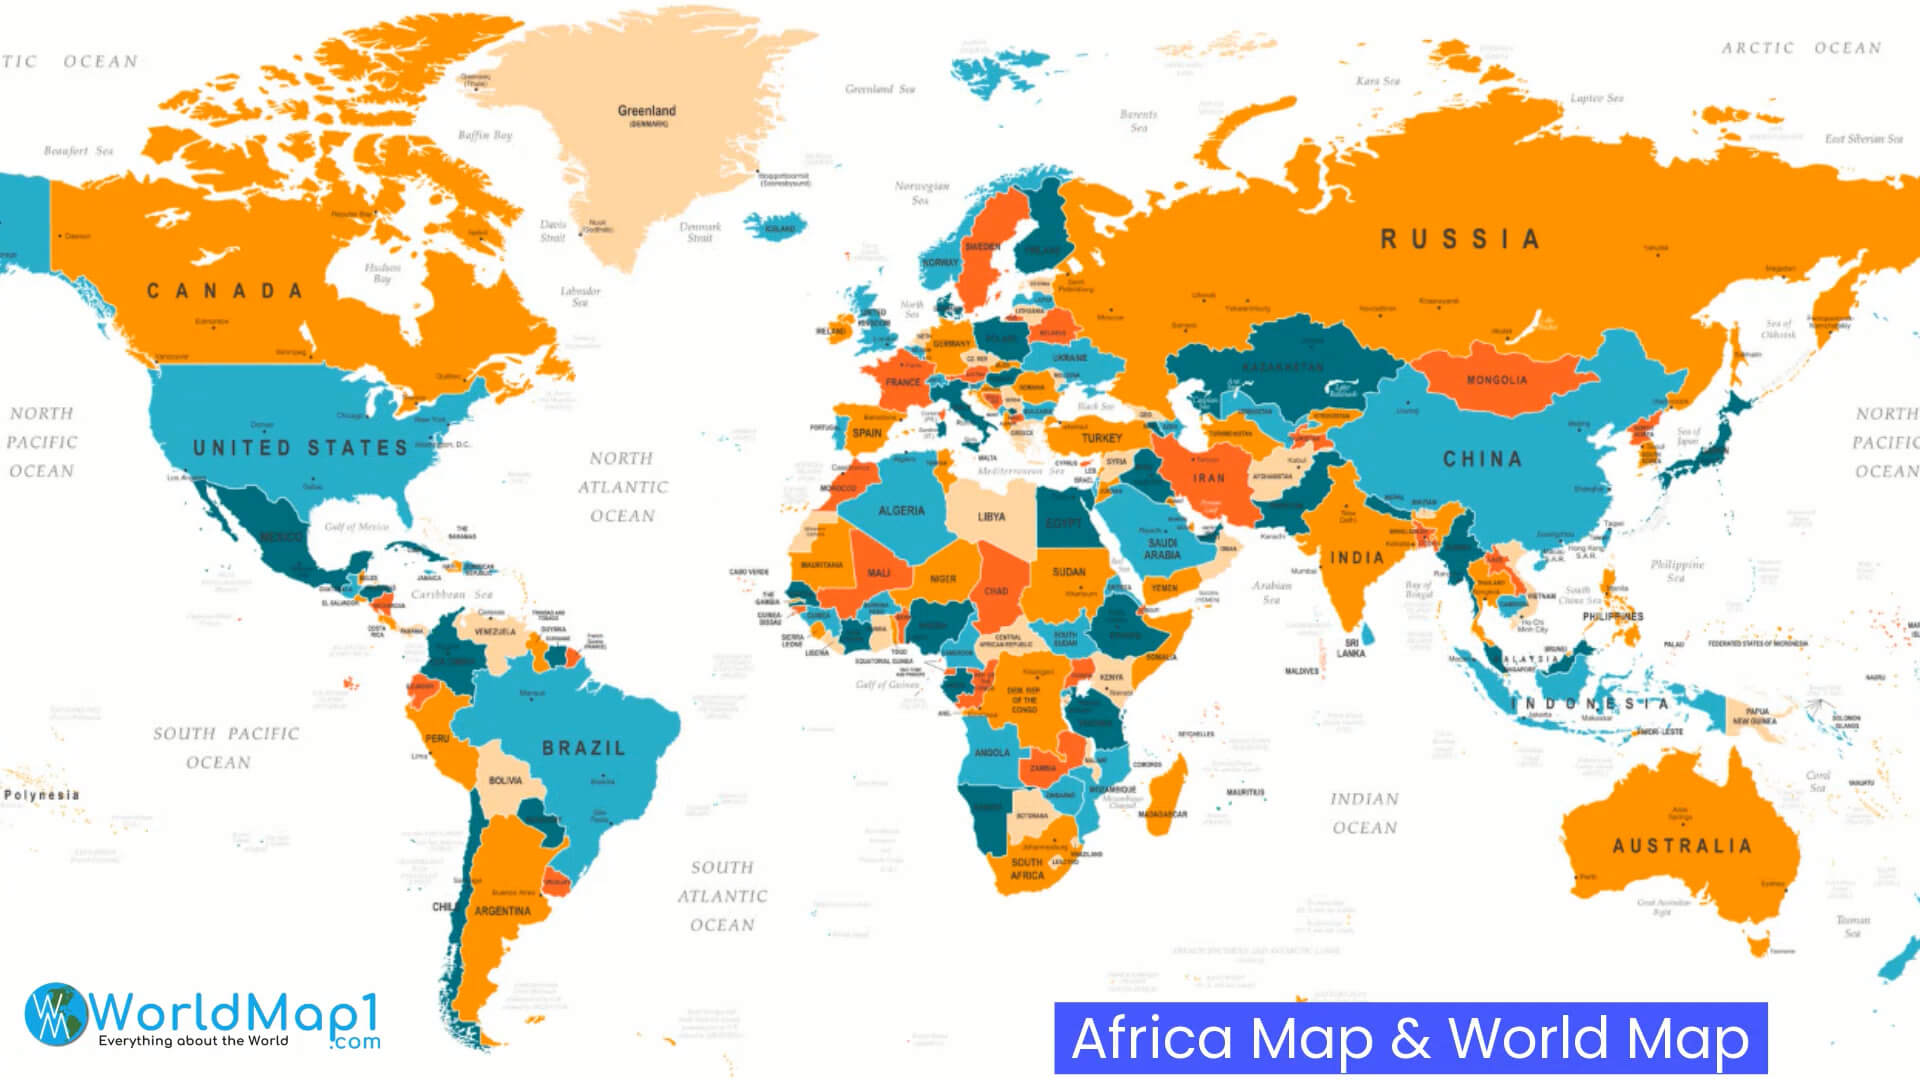 World Map and Africa Map